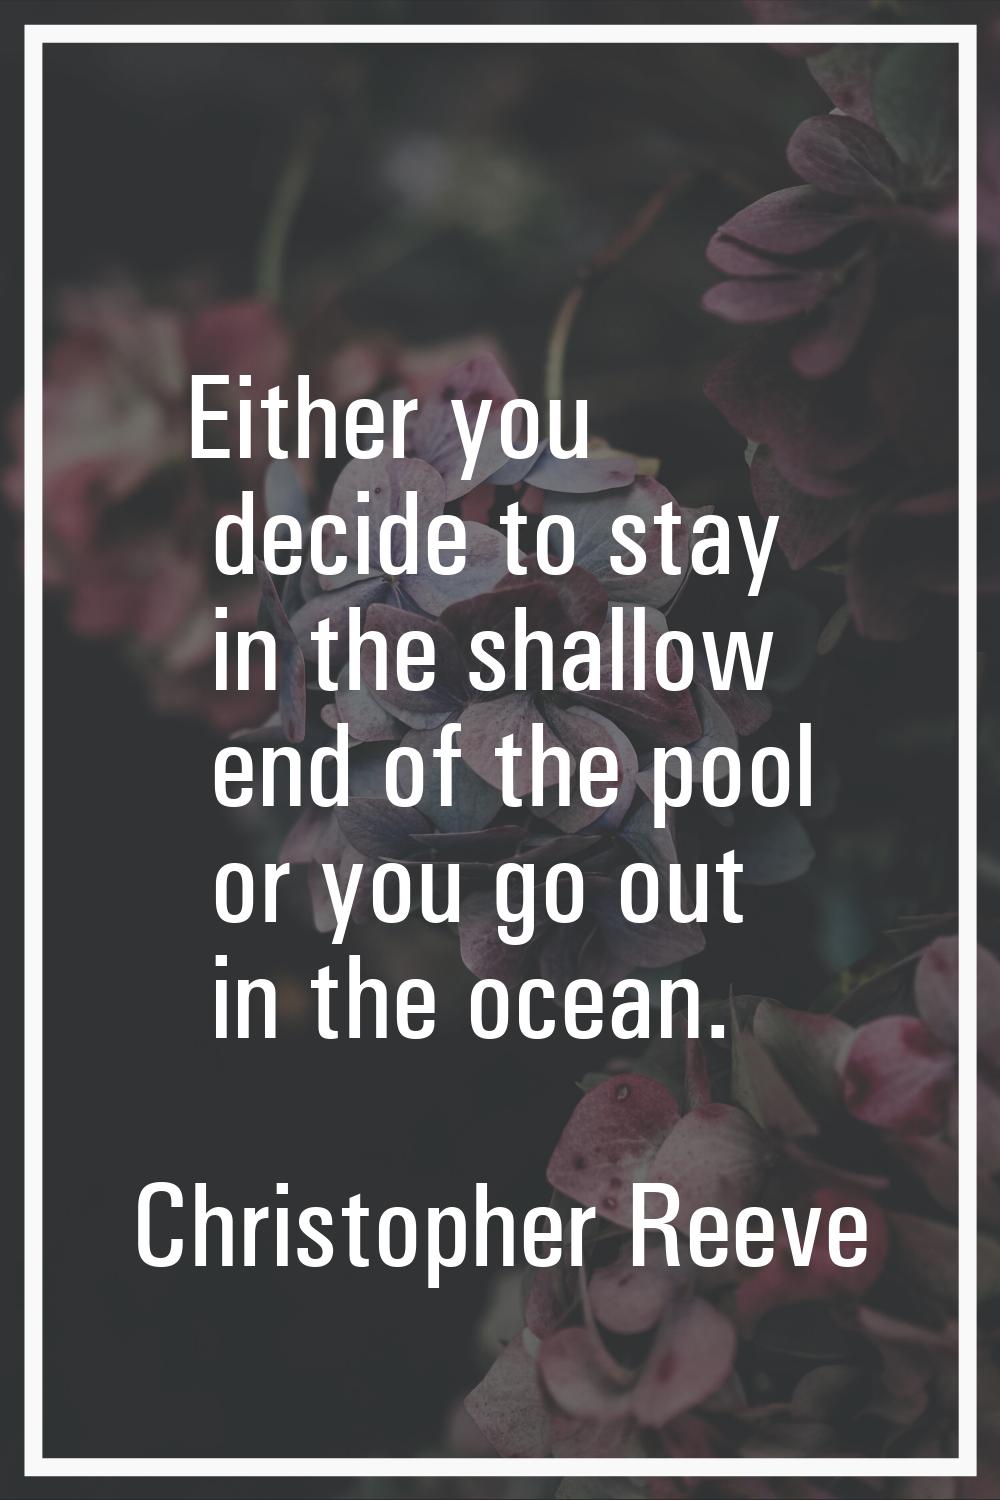 Either you decide to stay in the shallow end of the pool or you go out in the ocean.